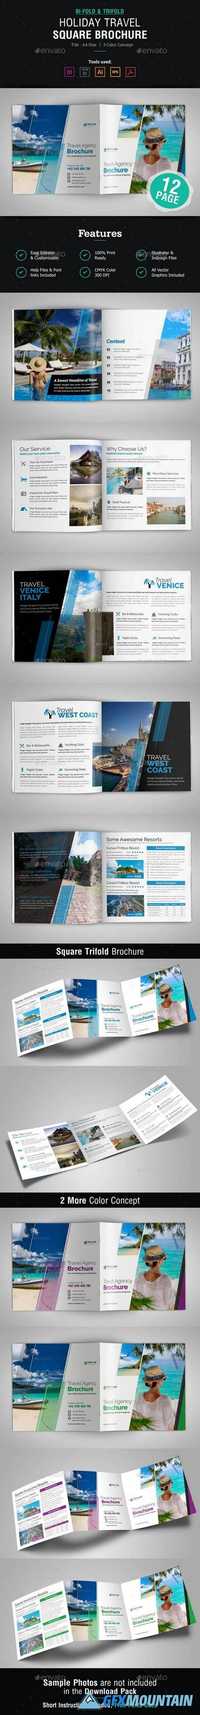 Holiday Travel Square Bifold & Trifold Brochure 20178949